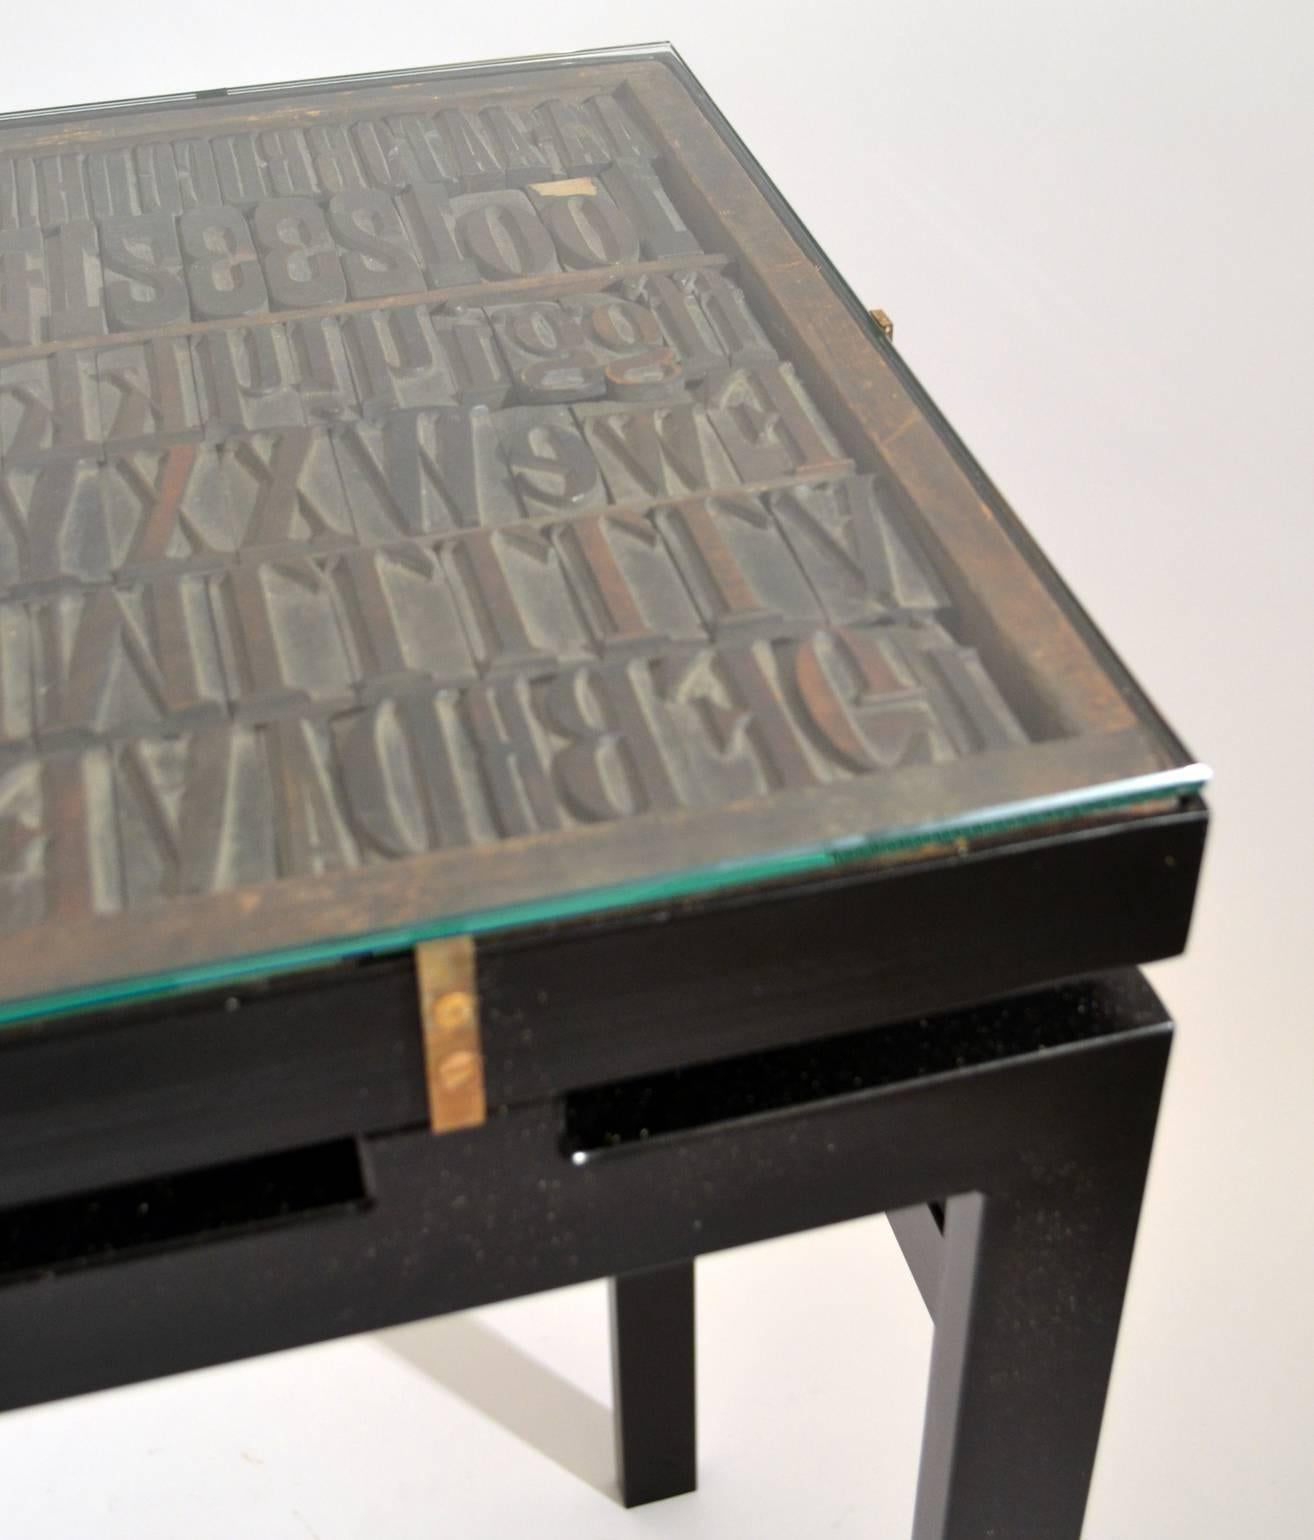 Console with Antique printing letters and glass top on metal frame. The console is specially designed to display 1920's typography letters housed in its original wooden typesetter tray with a variety of wooden vintage letterpress printing blocks of